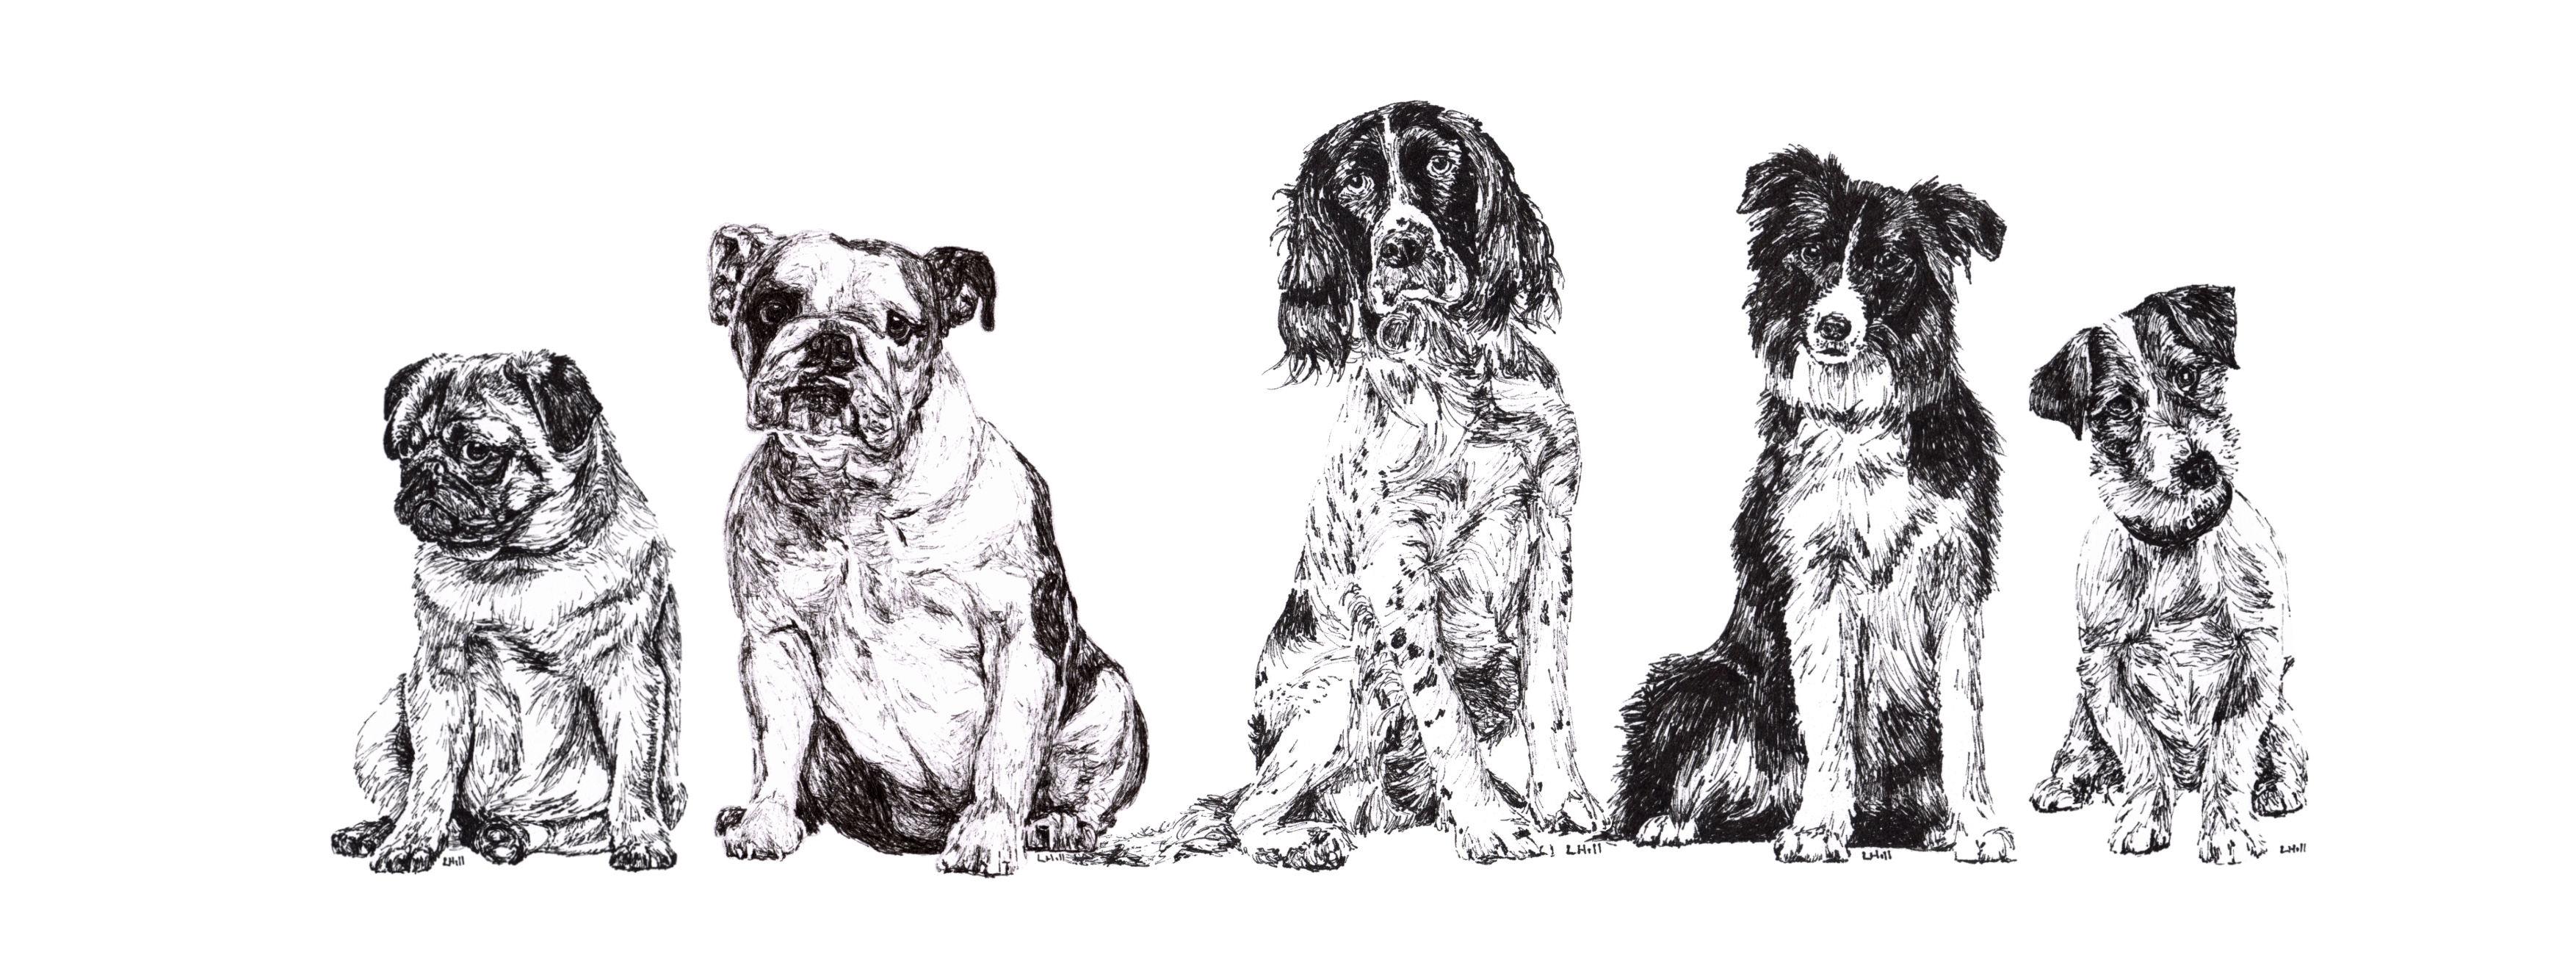 5 Dogs, Pug, English Bulldog, Springer Spaniel, Border Collie and Jack Russell Terrier pen and ink illustration by Louisa Hill